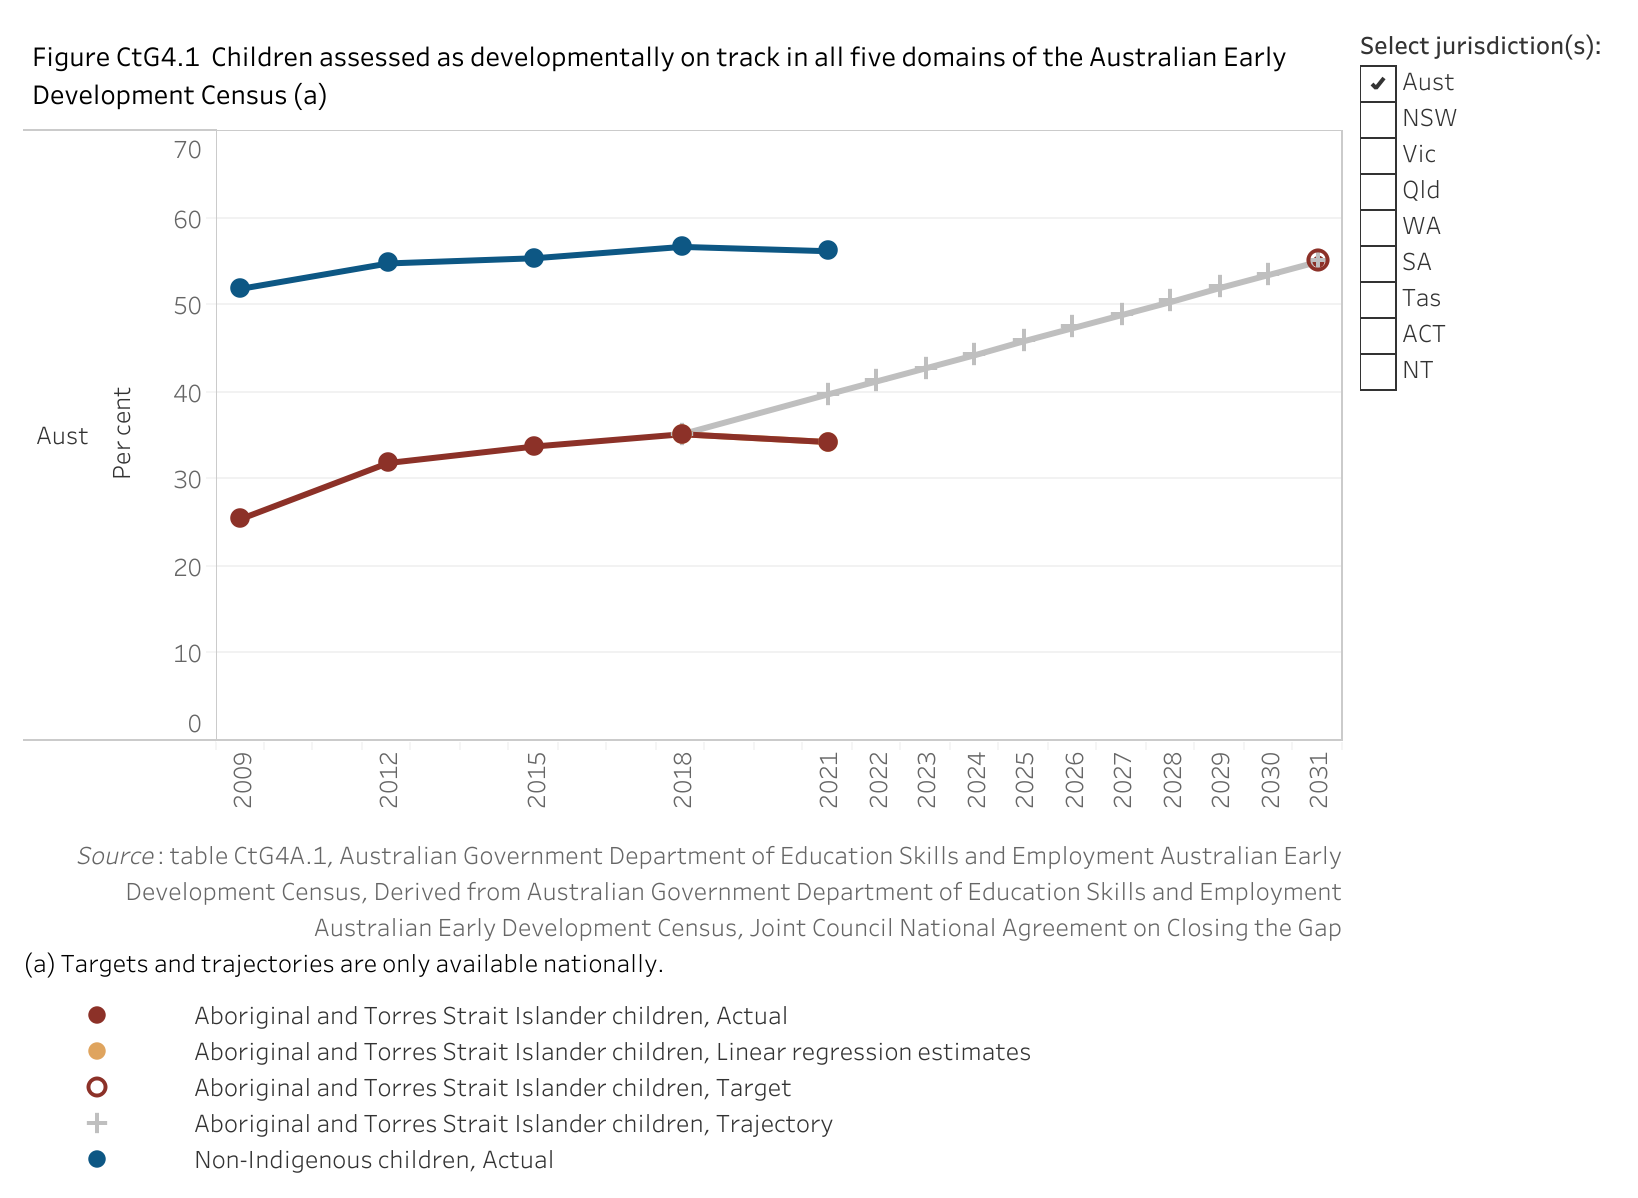 Figure CtG4.1 shows children assessed as developmentally on track in all five domains of the Australian Early Development Census. More details can be found within the text near this image.